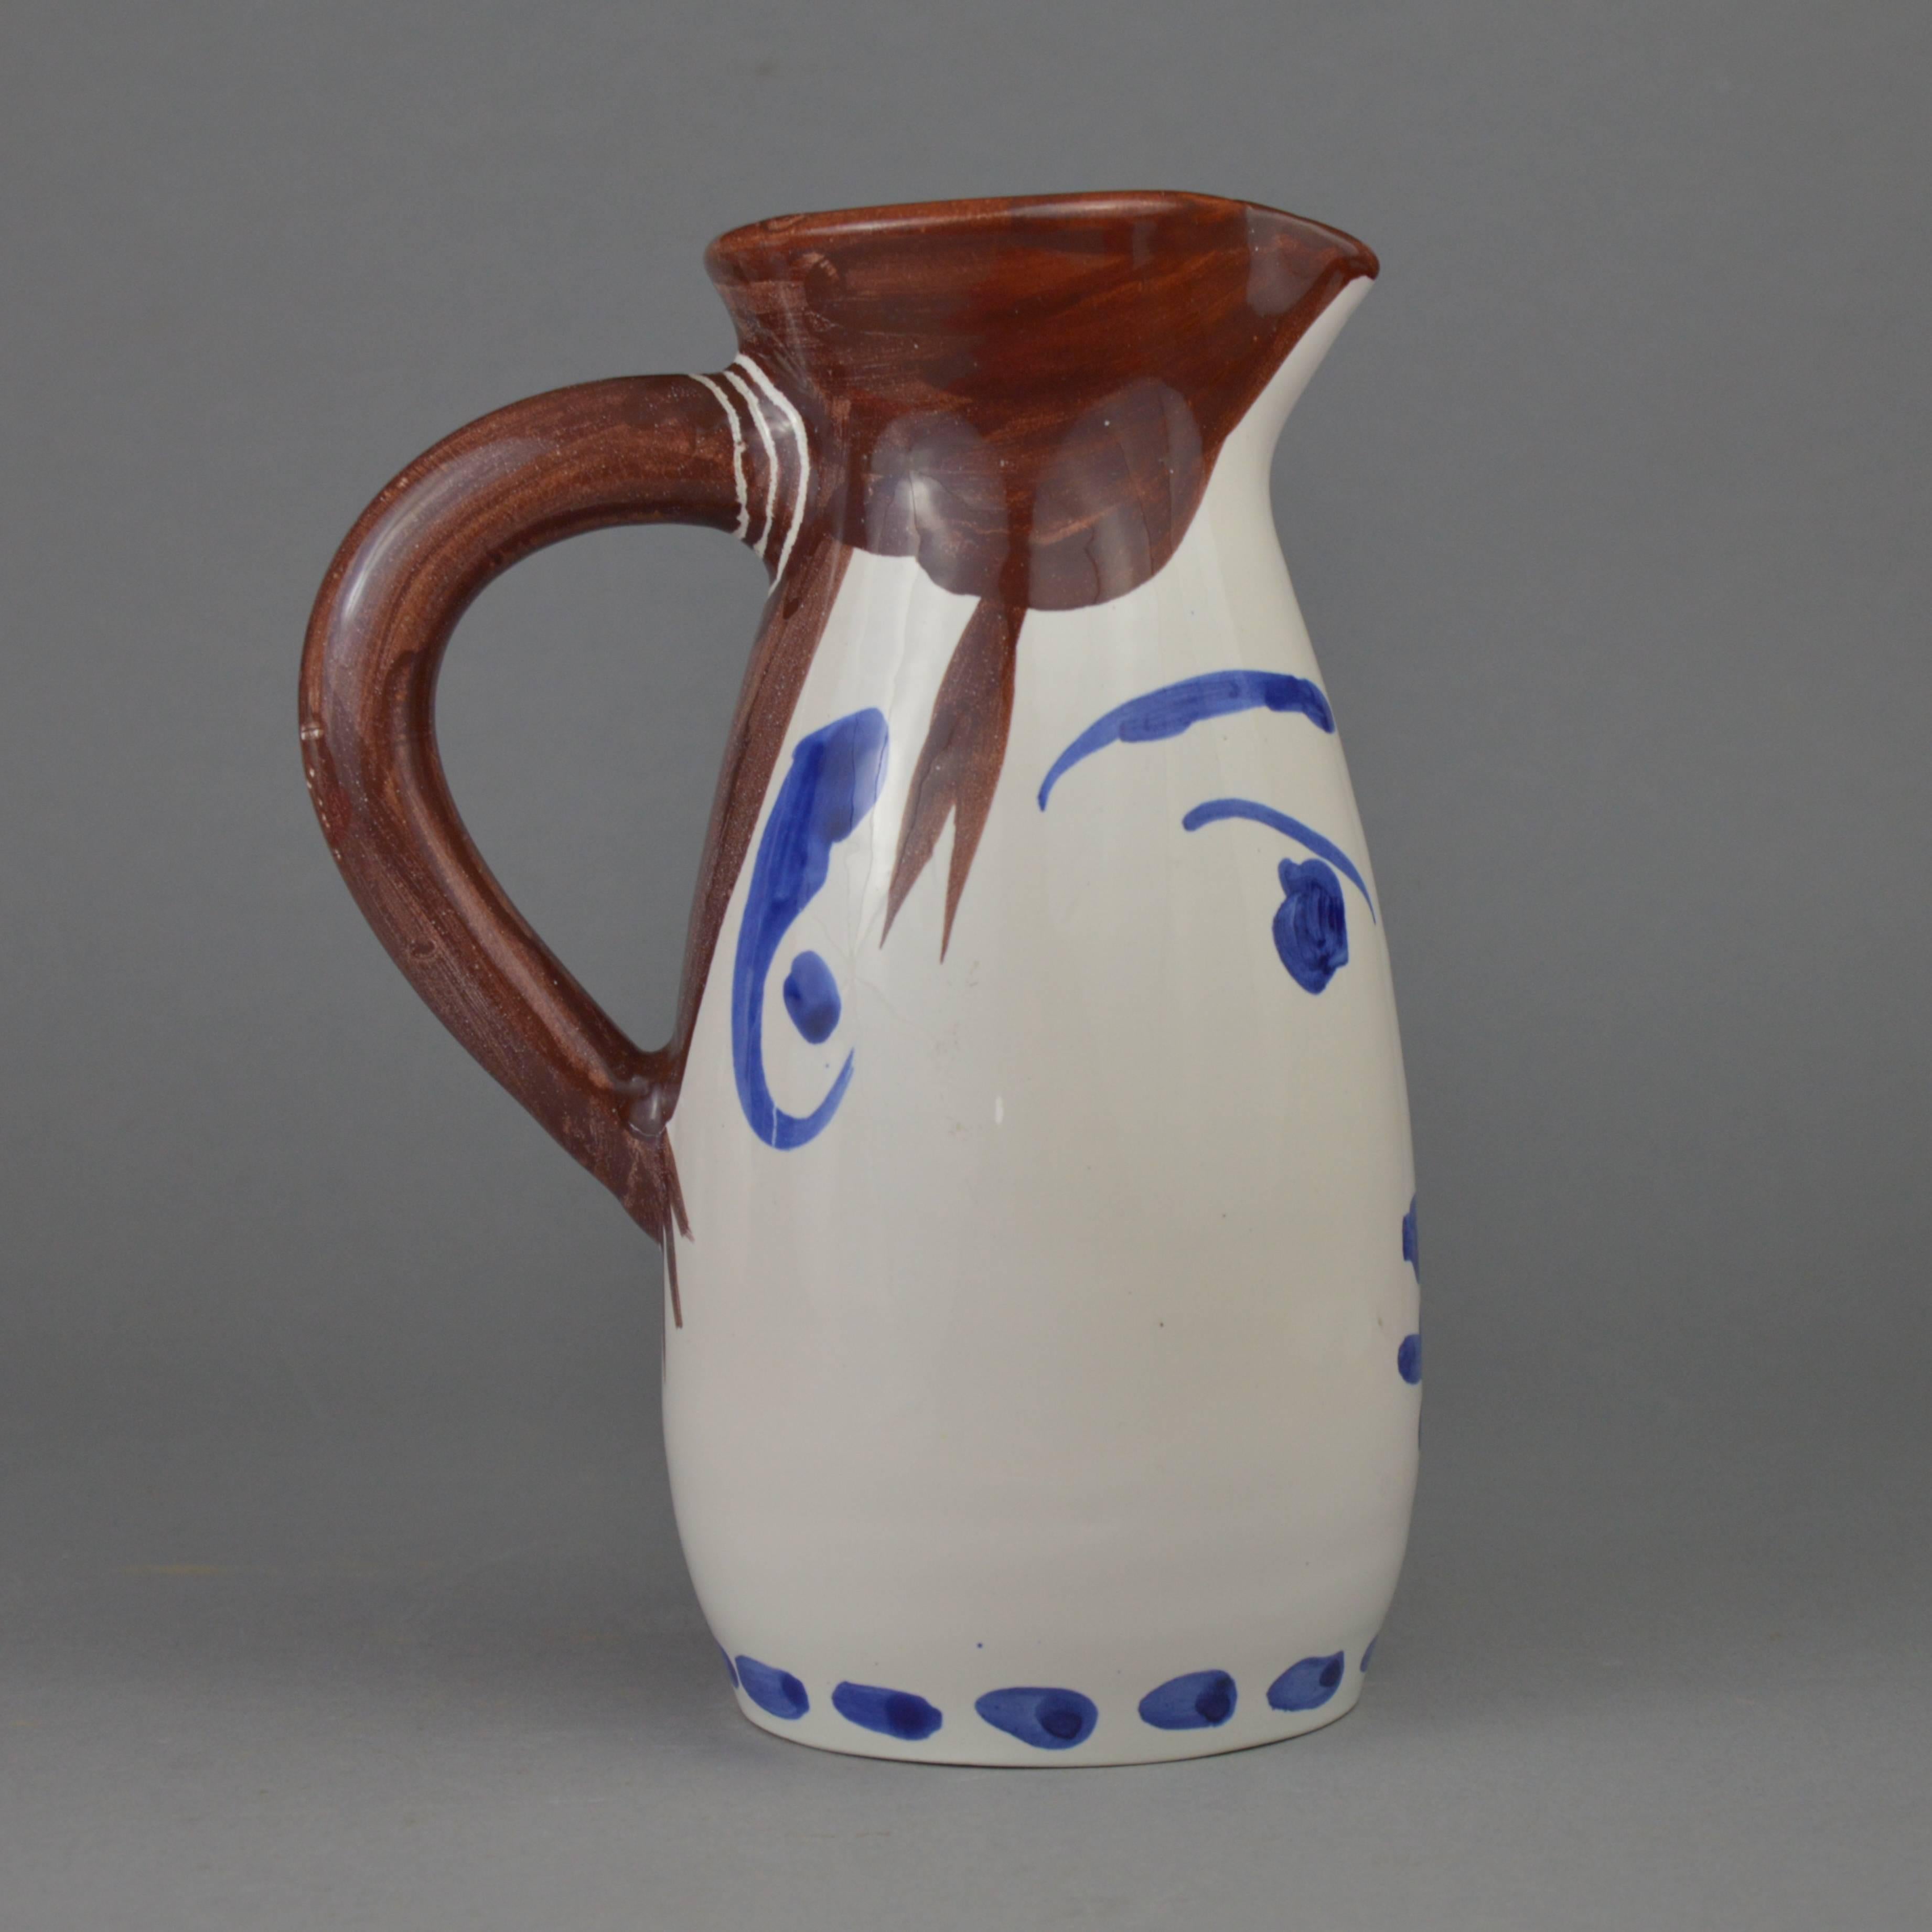 Modern Pablo Picasso Madoura Ceramic Turned Pitcher Face Tankard, 1959 For Sale